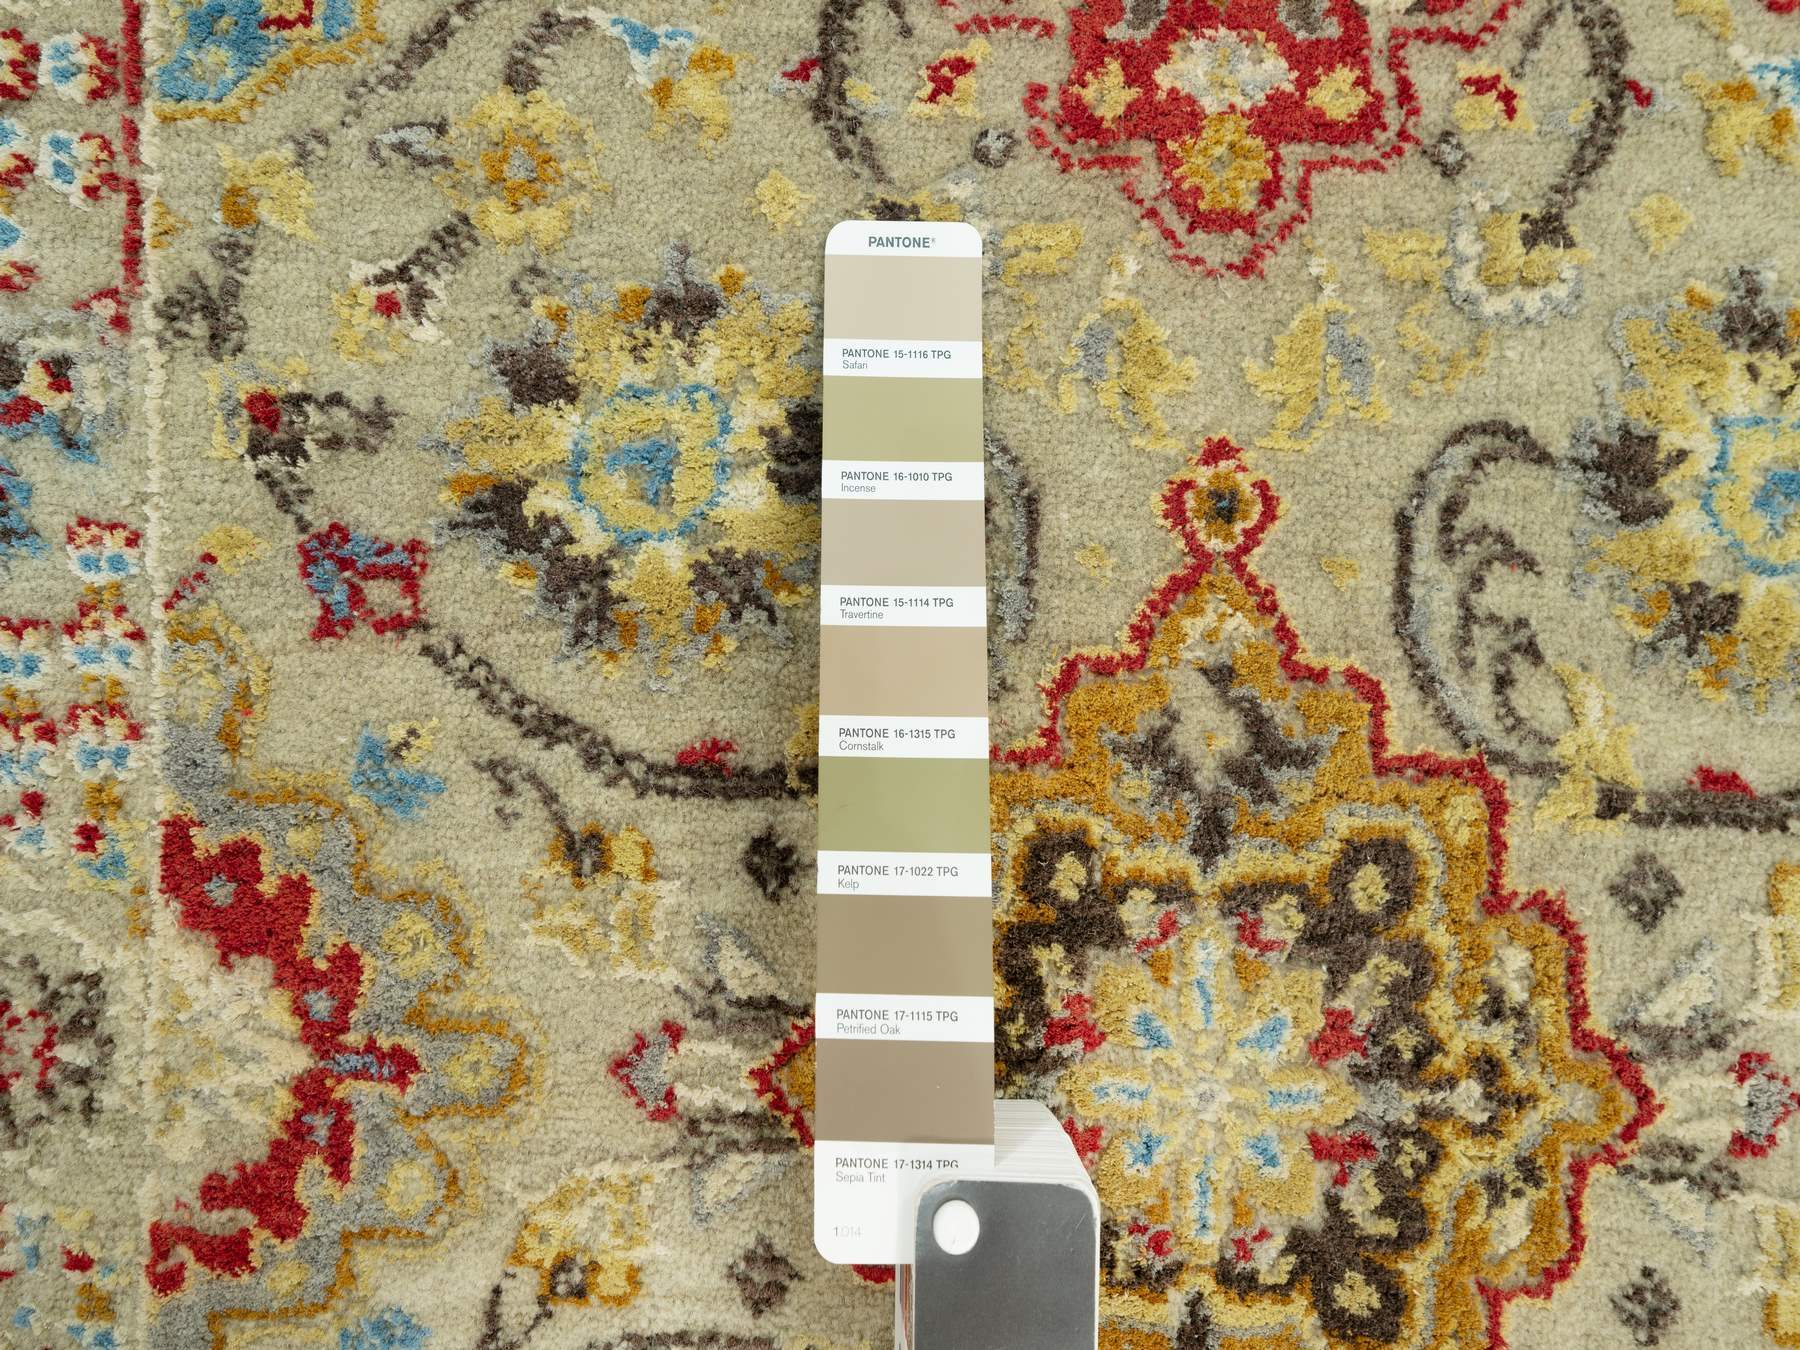 TransitionalRugs ORC814716